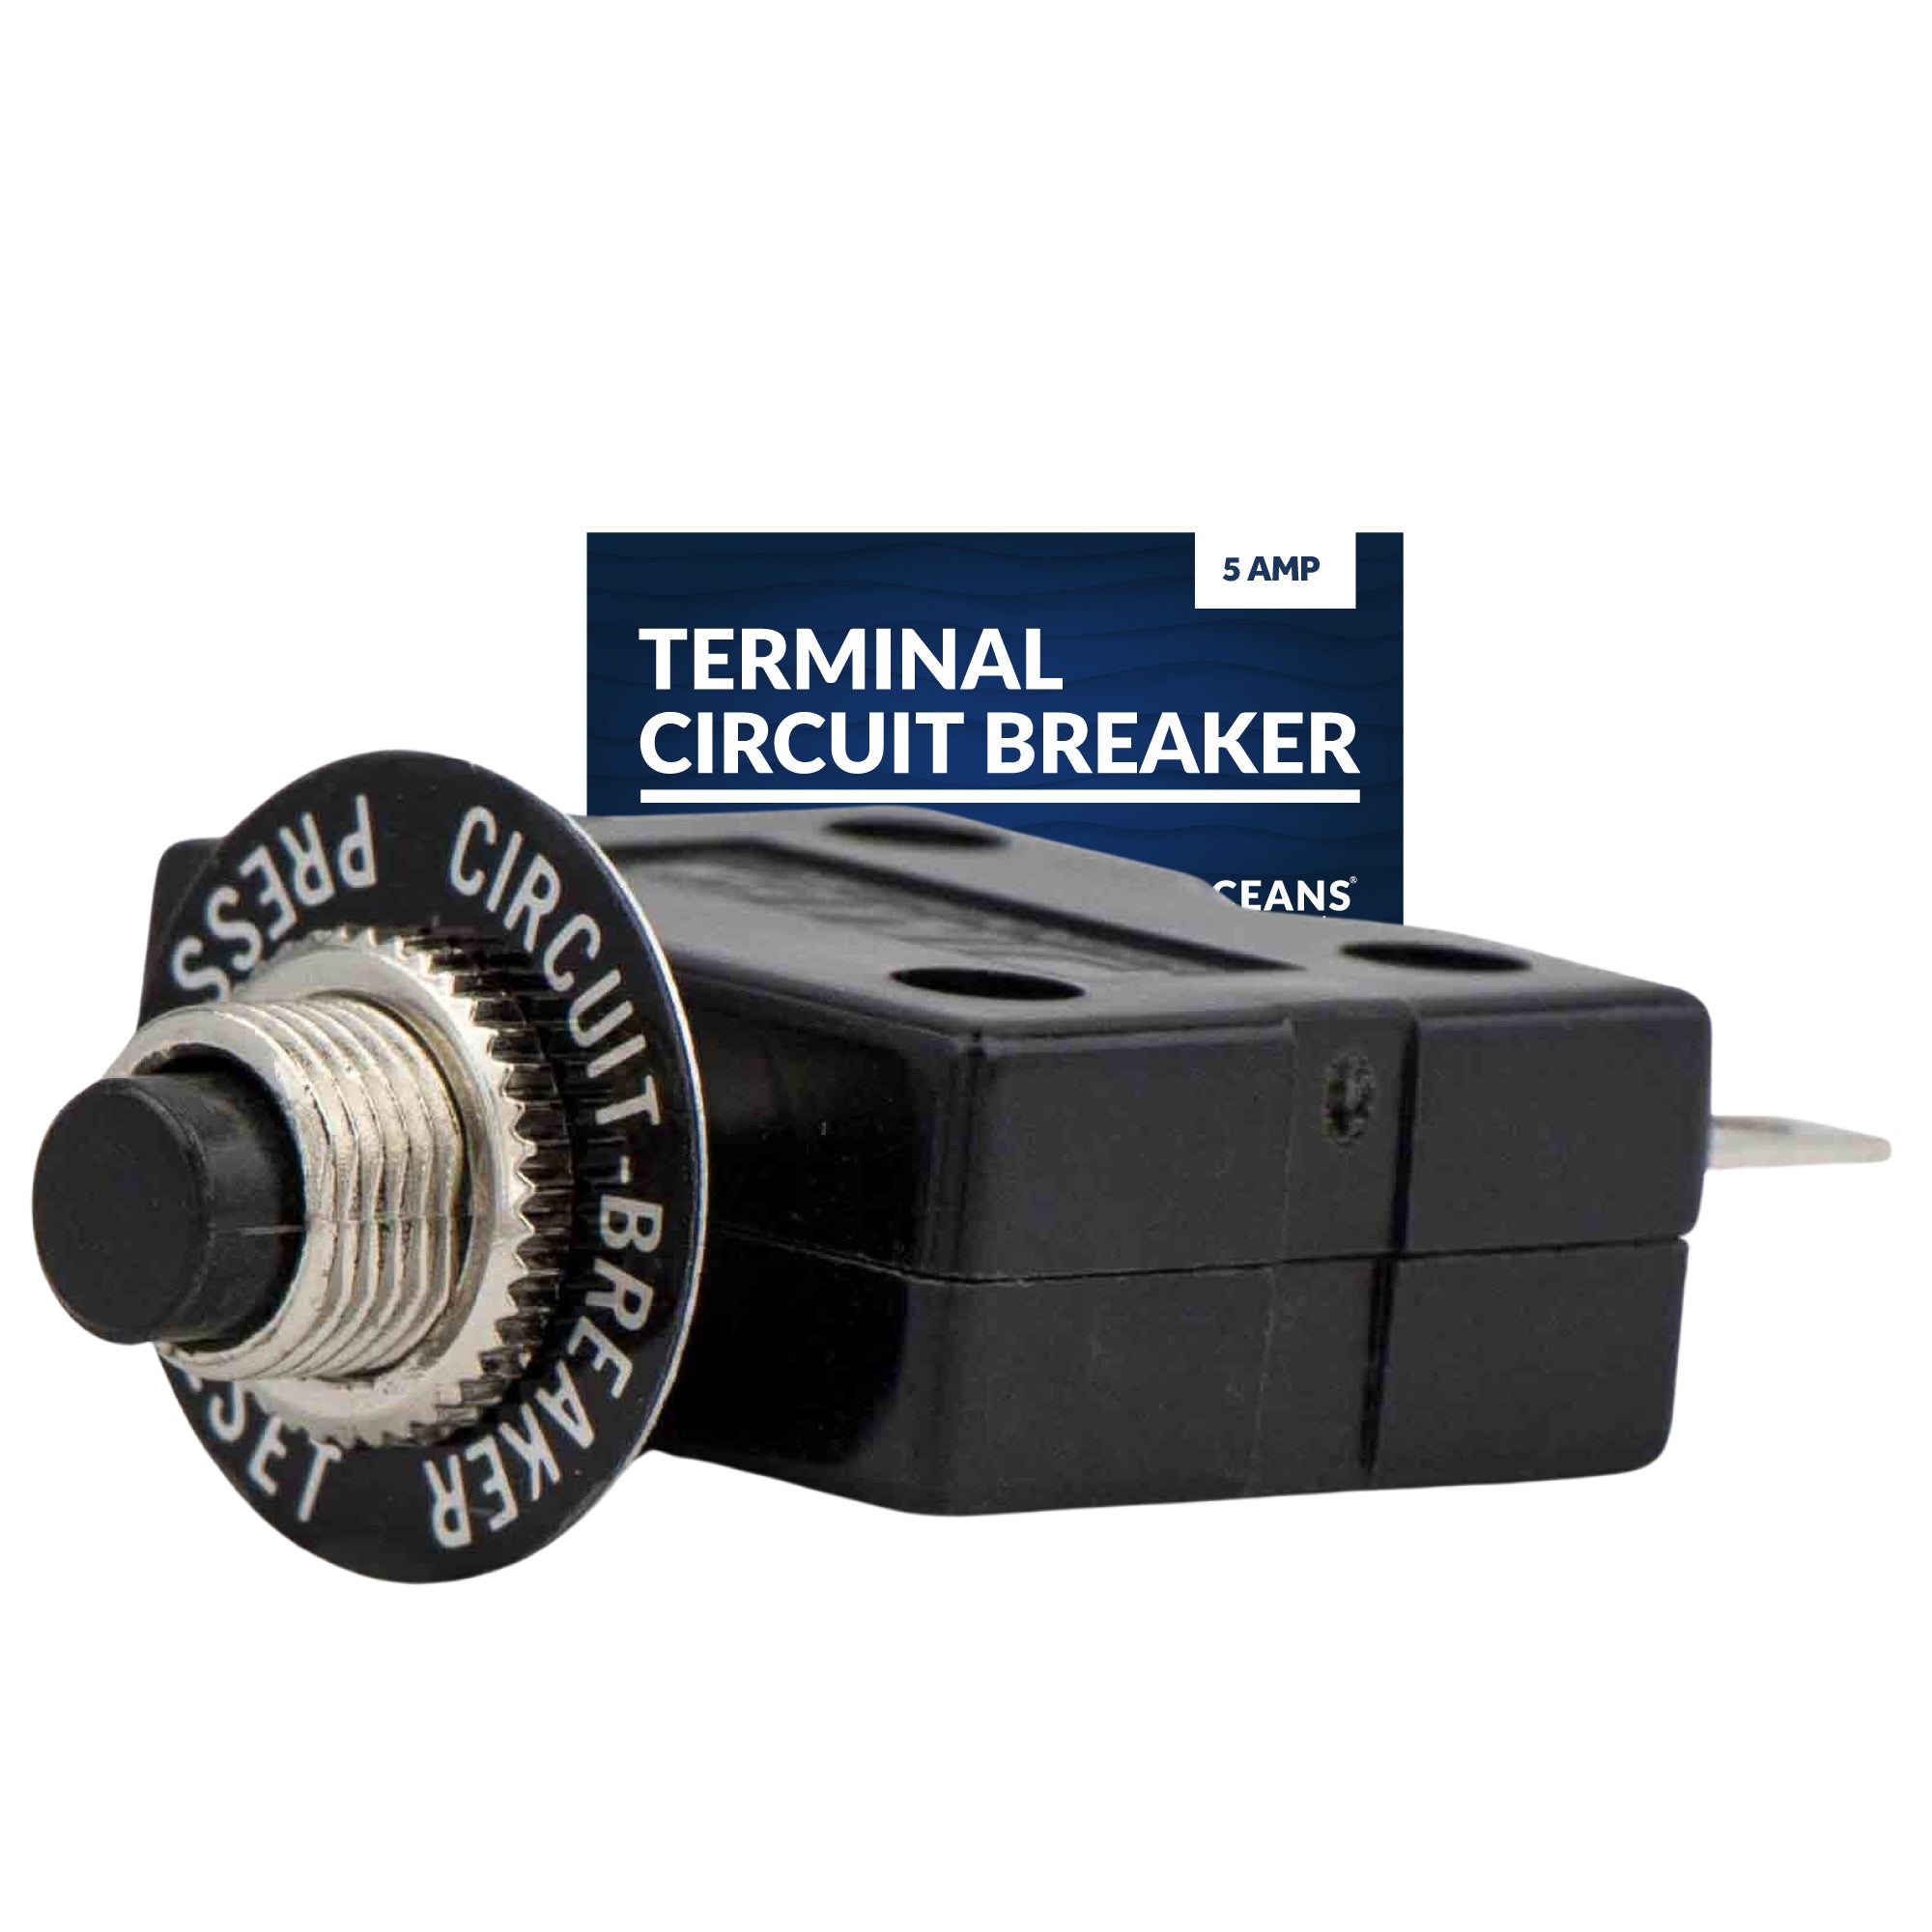 Terminal Circuit Breaker with Reset Button, 5 Amp - FO1678